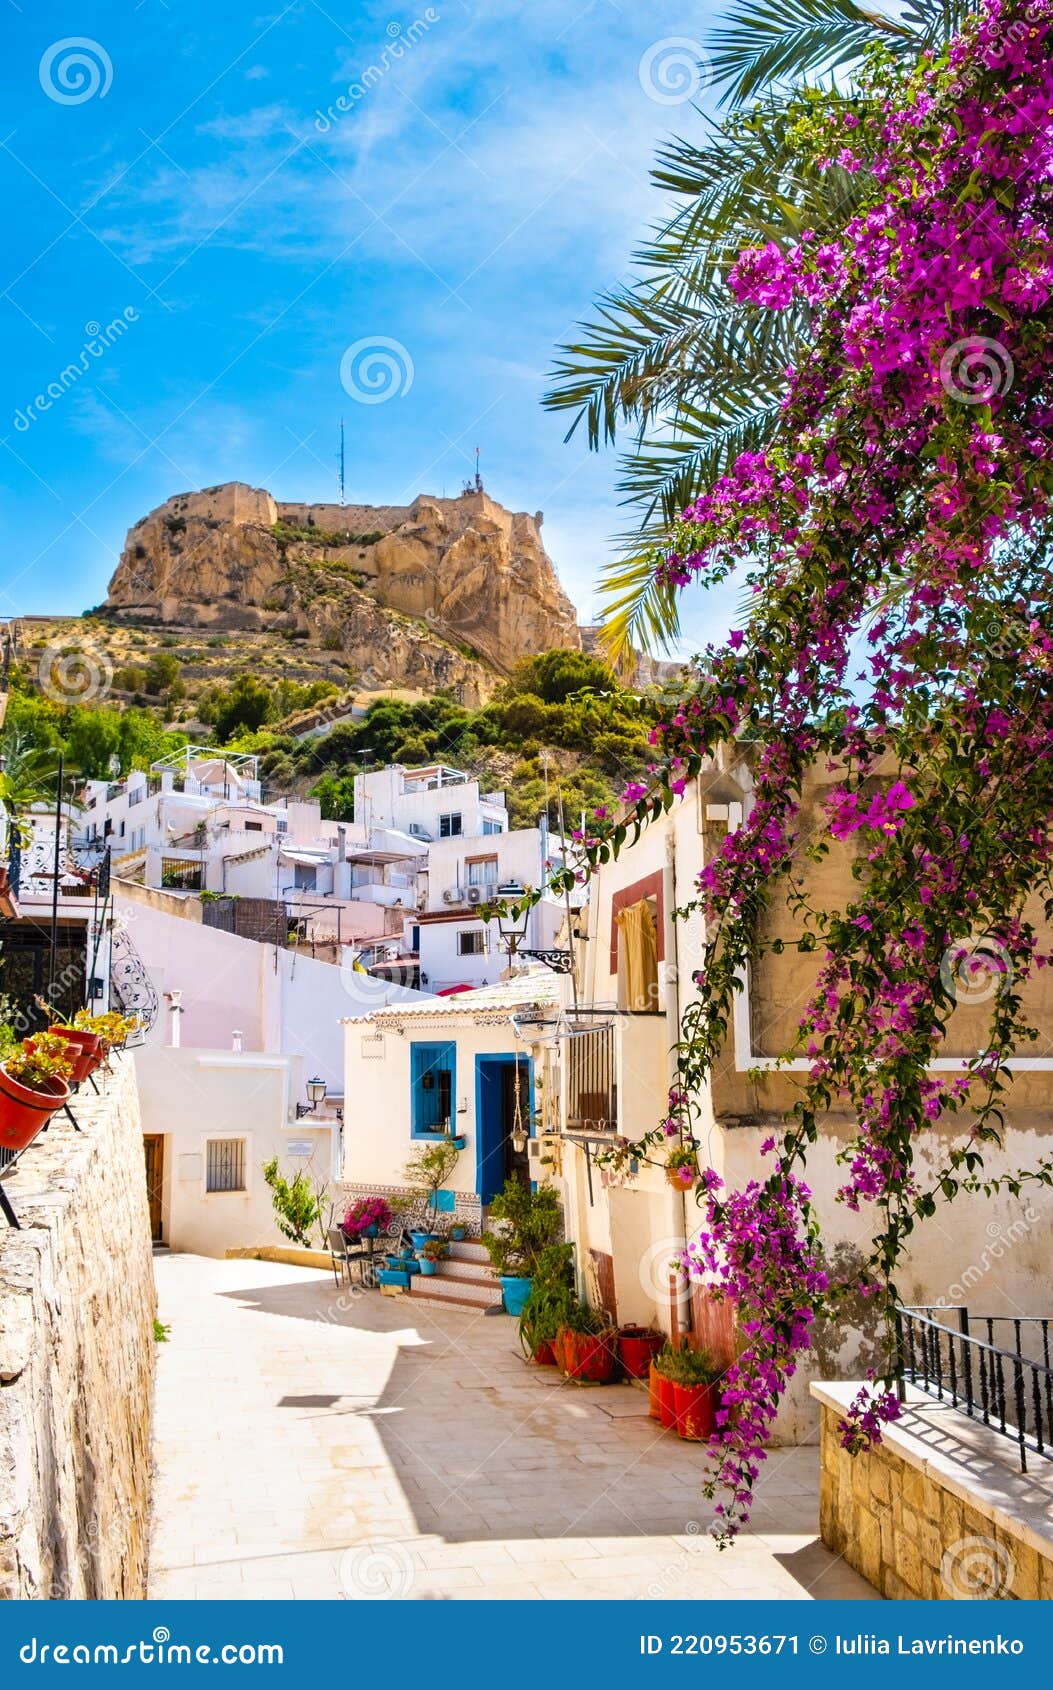 alicante old town and santa barbara castle. narrow street with white houses and purple flowers on hillside in ancient